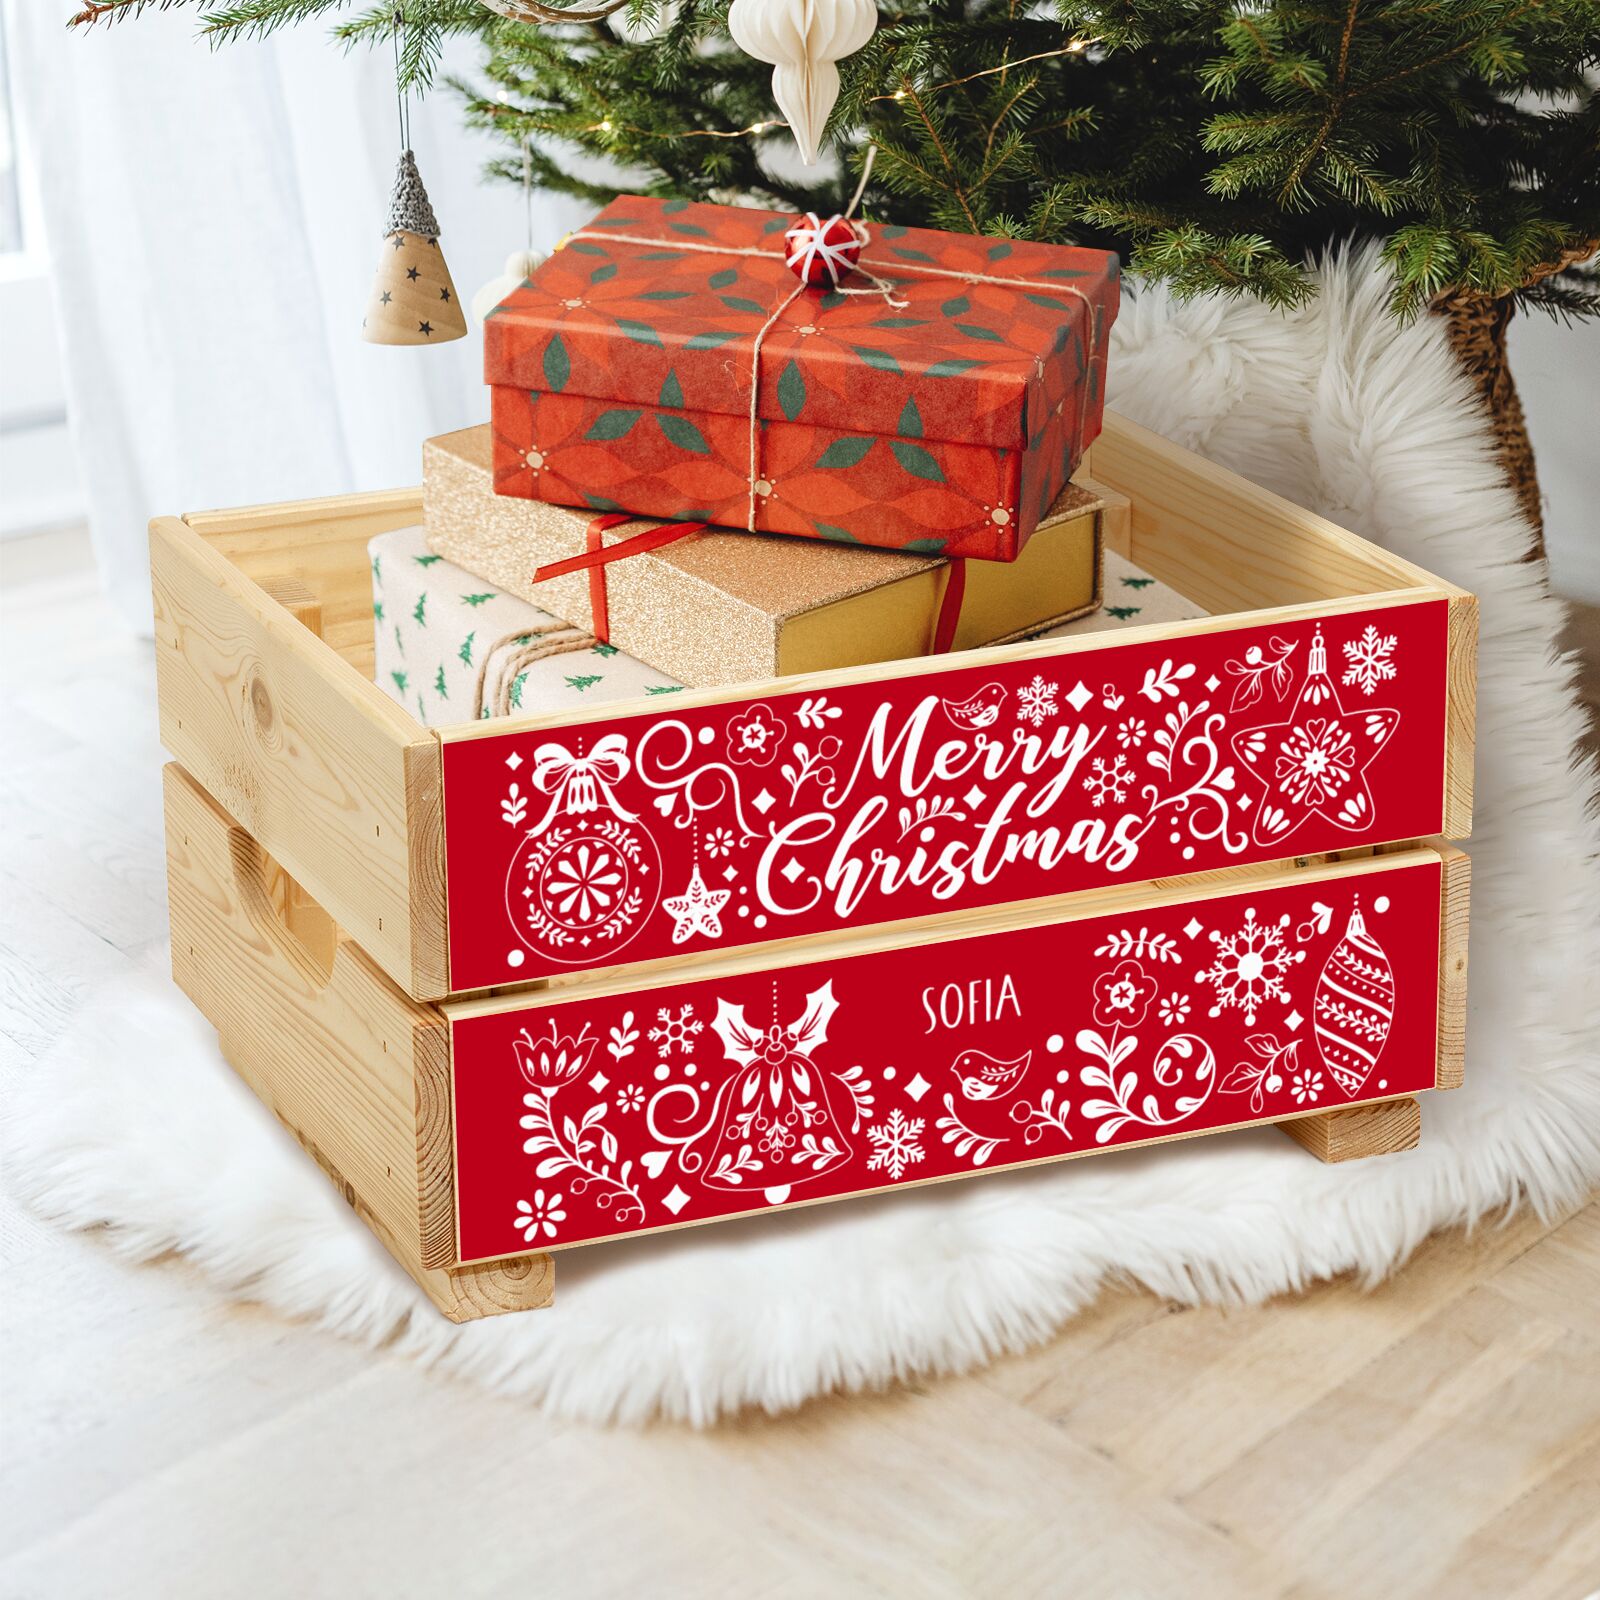 Merry Christmas Personalised Christmas Eve Crate Box in Cosy room